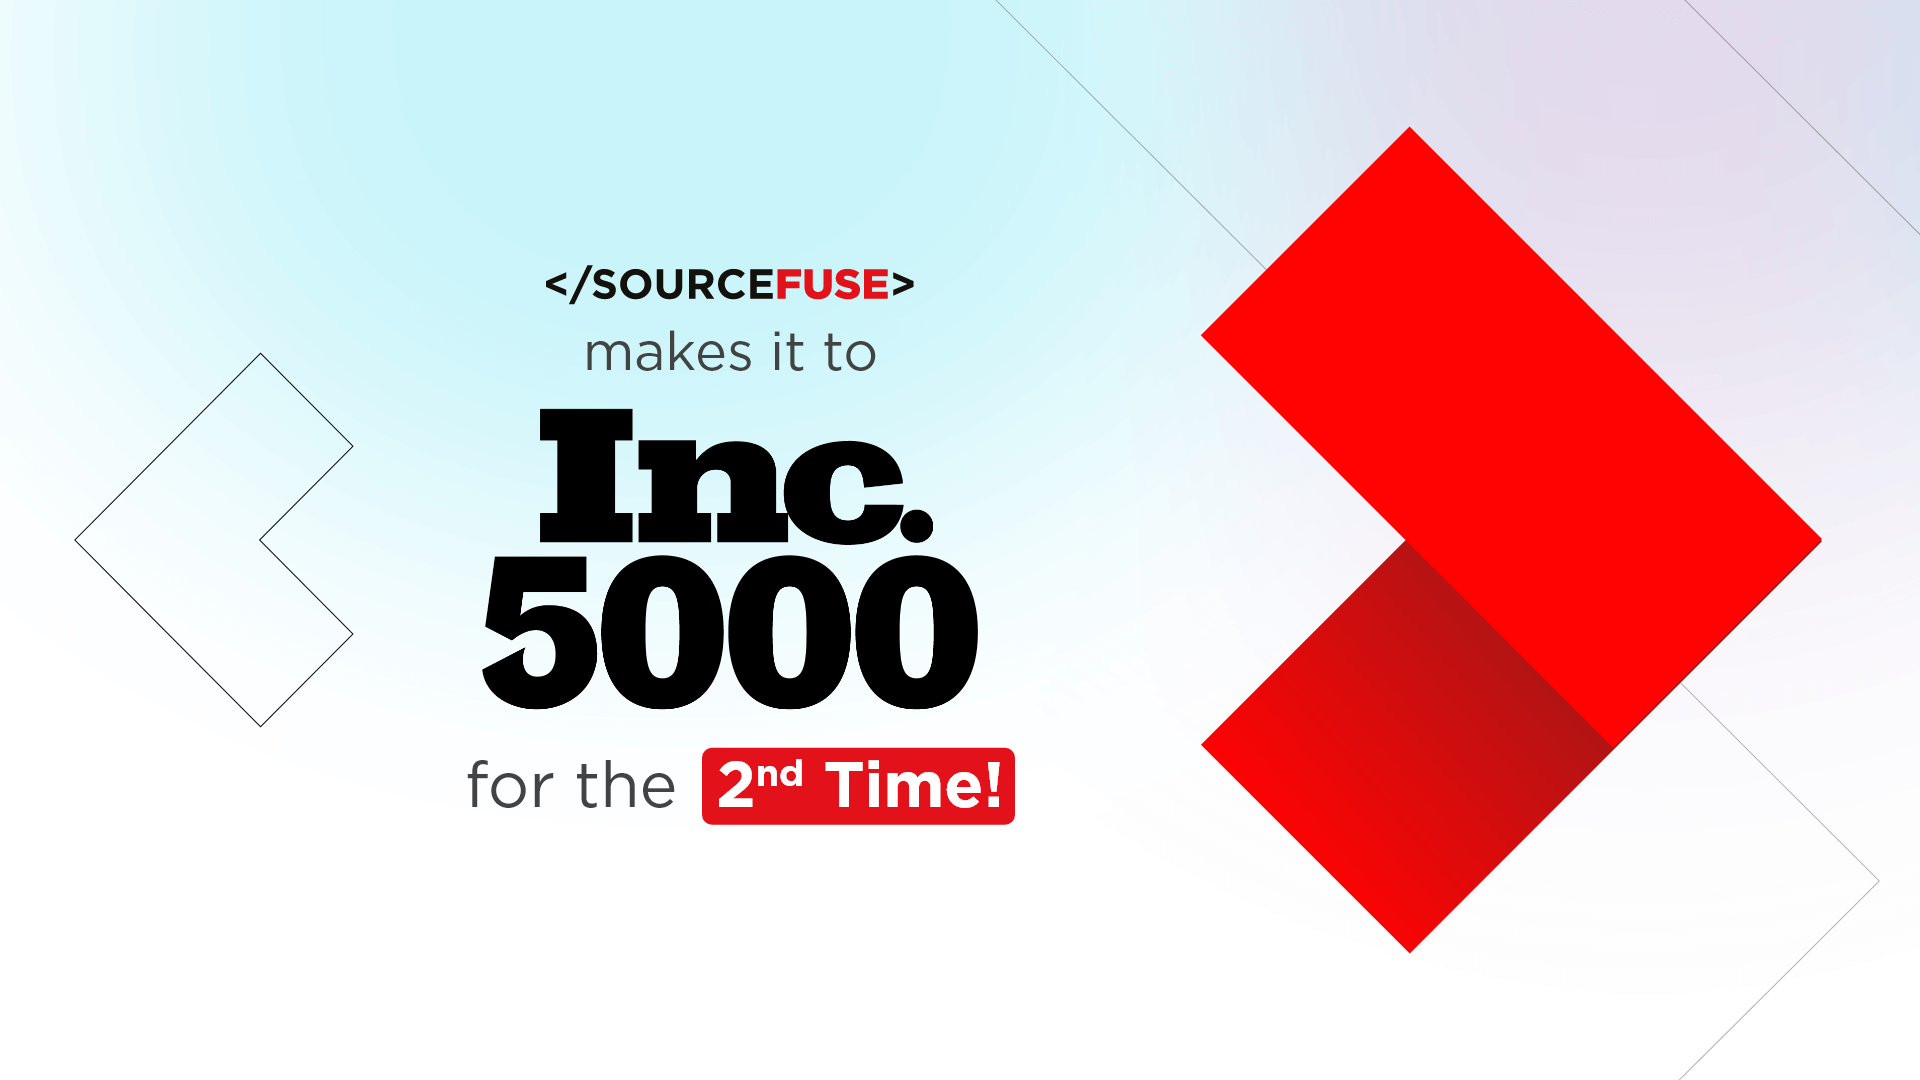 SourceFuse makes it to the Inc. 5000 List for the 2nd Time, Cloud-Native Healthcare solutions in focus!